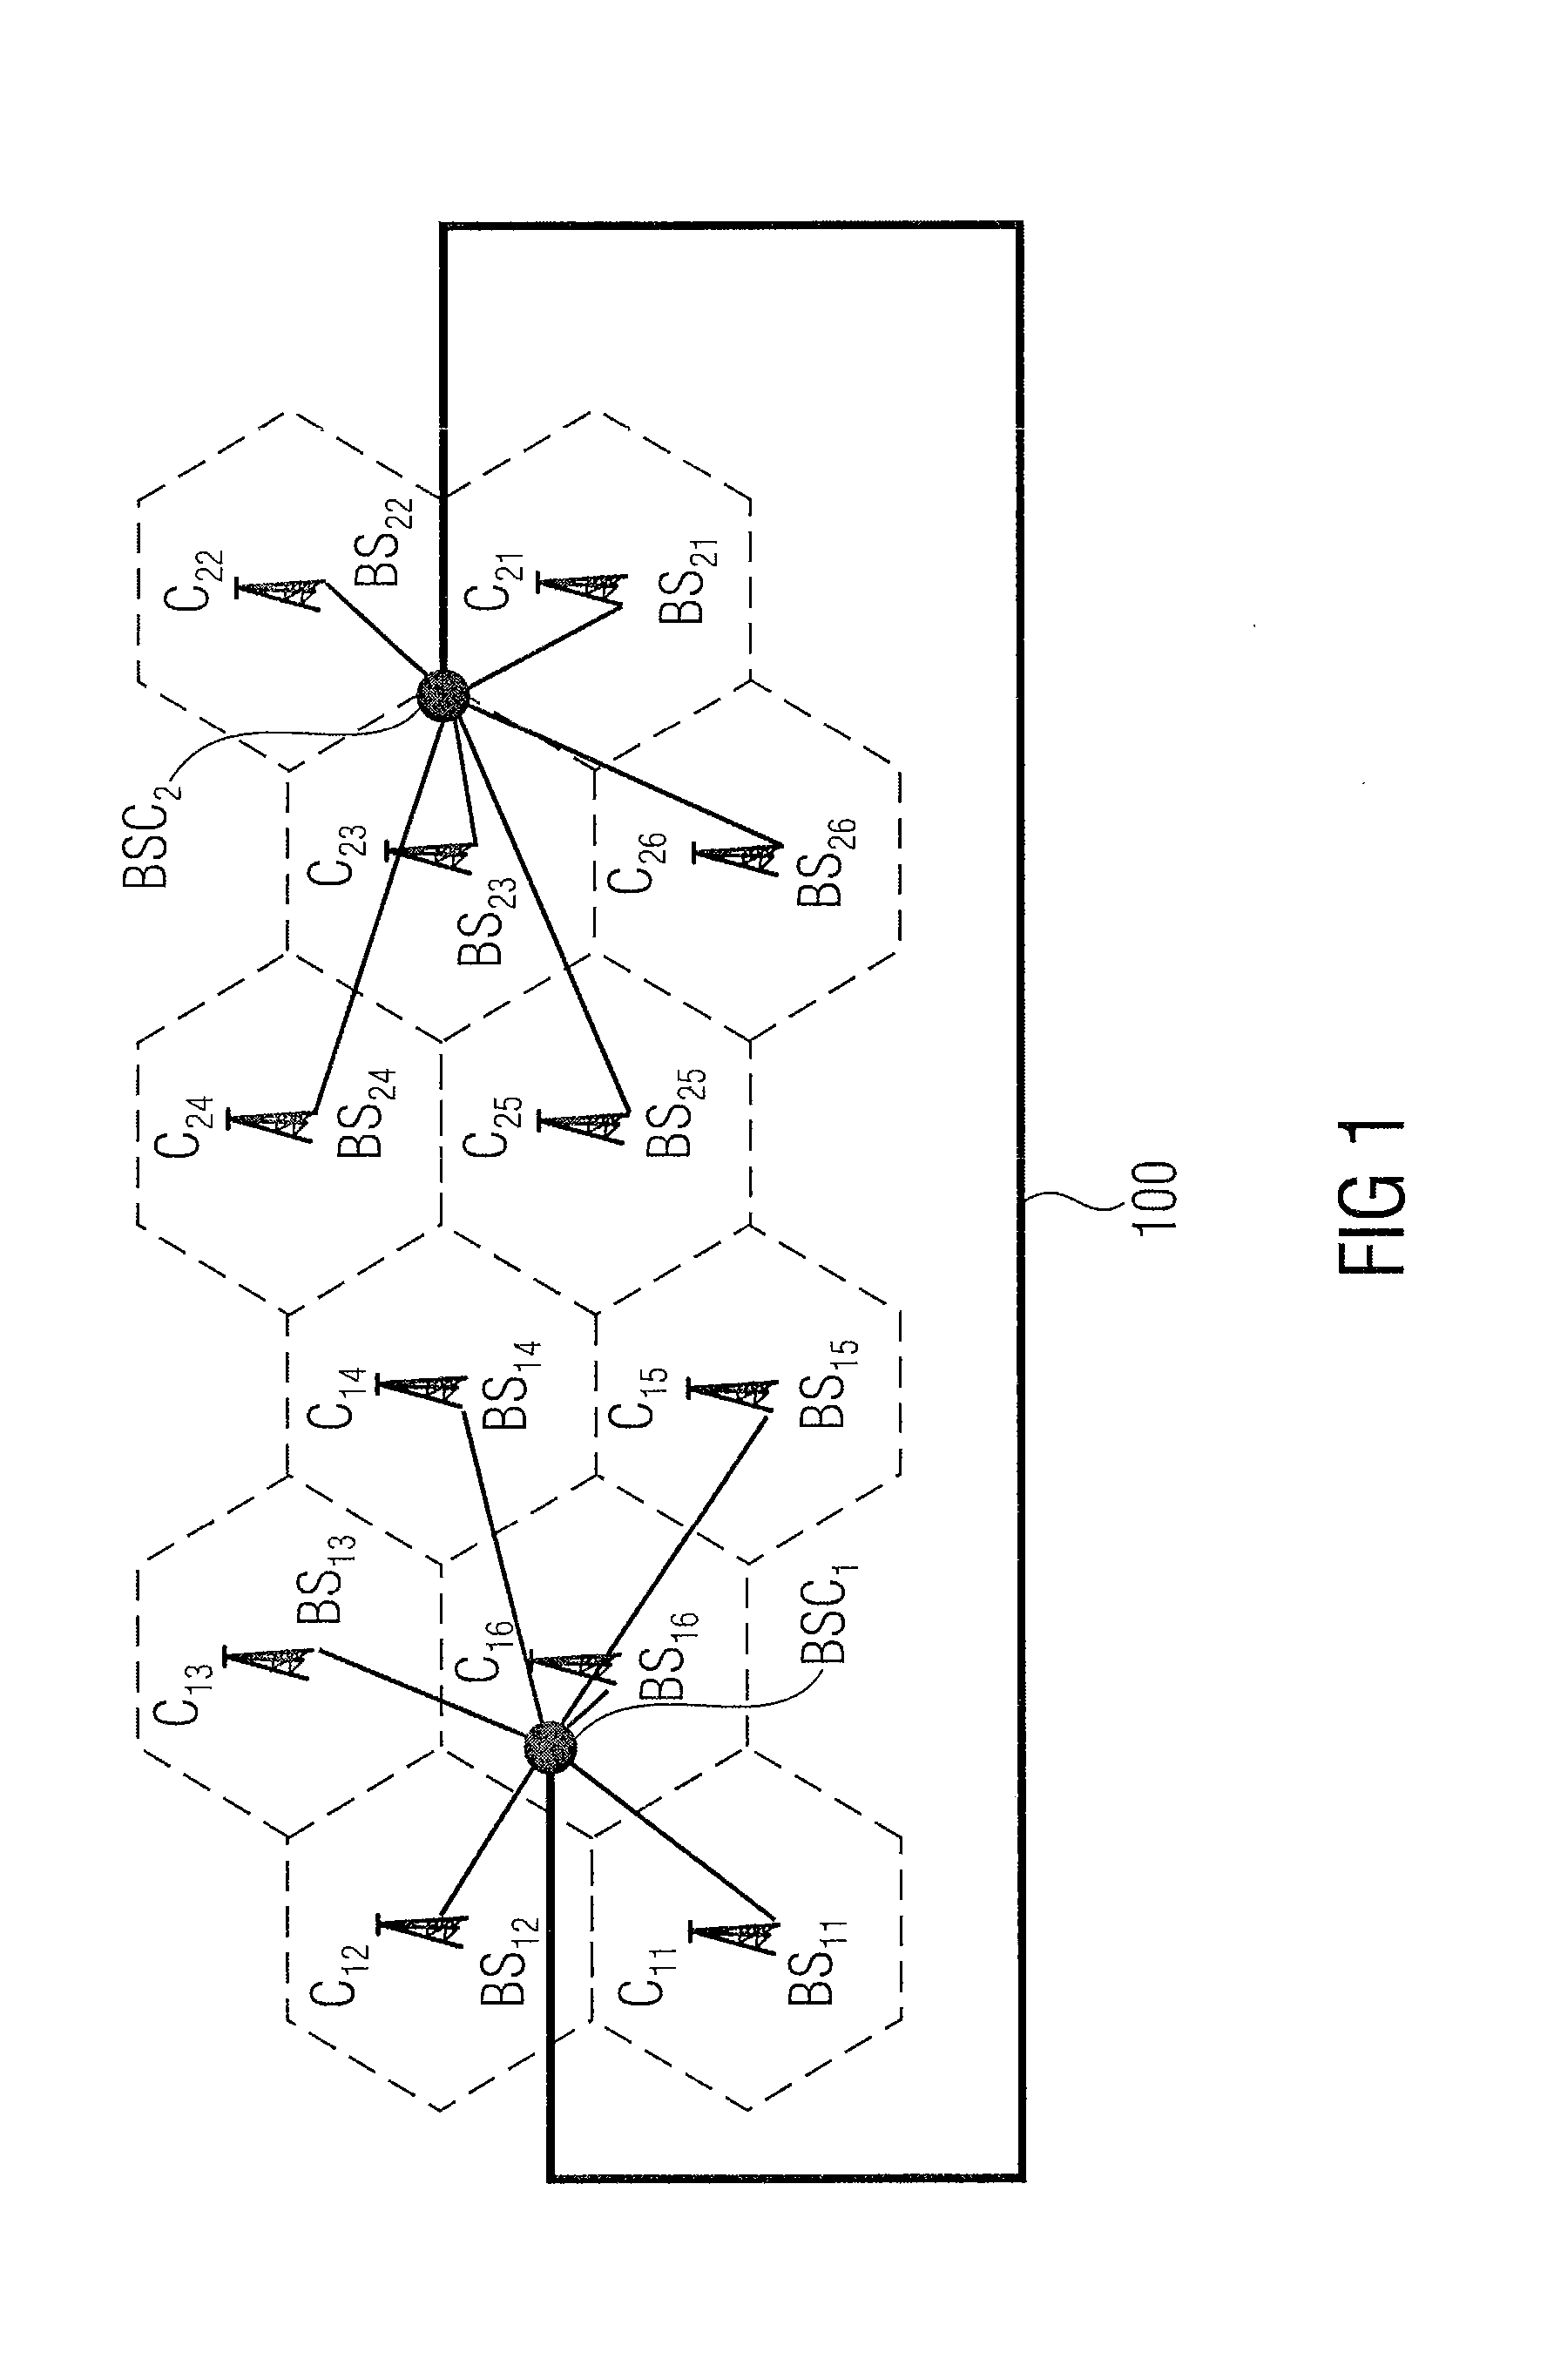 Method for coordinated multipoint (COMP) transmission/reception in wireless communication networks with reconfiguration capability